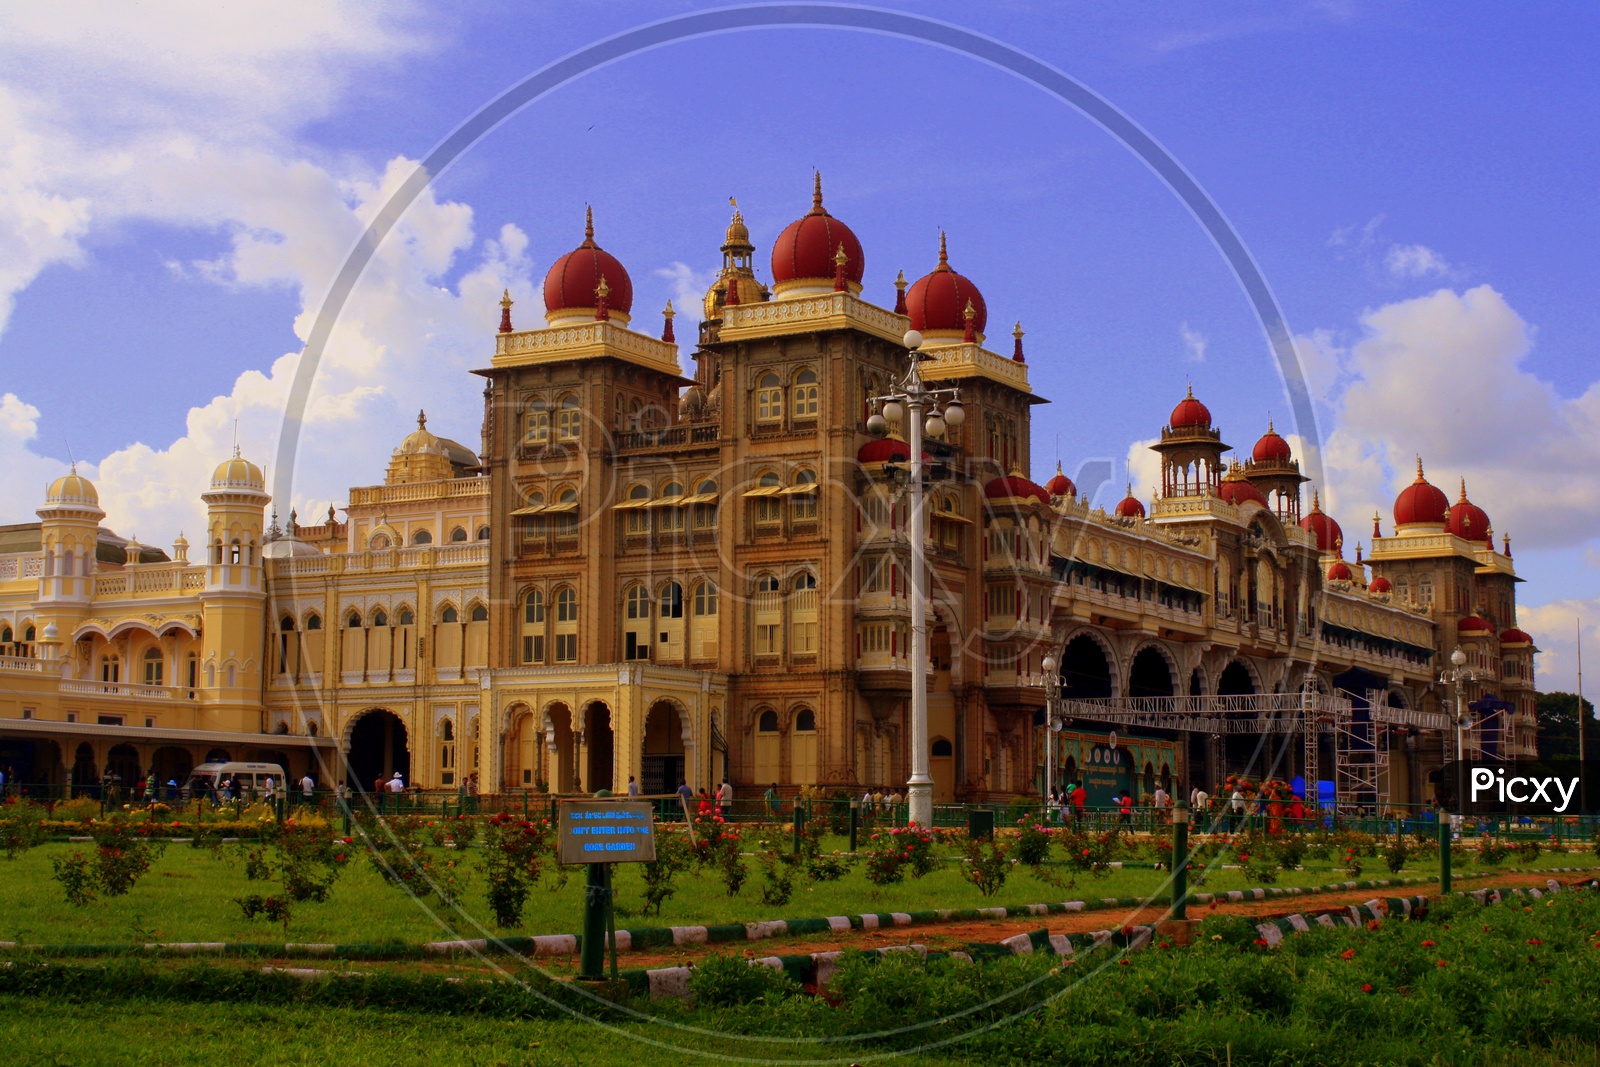 A View of Mysore Palace from outside